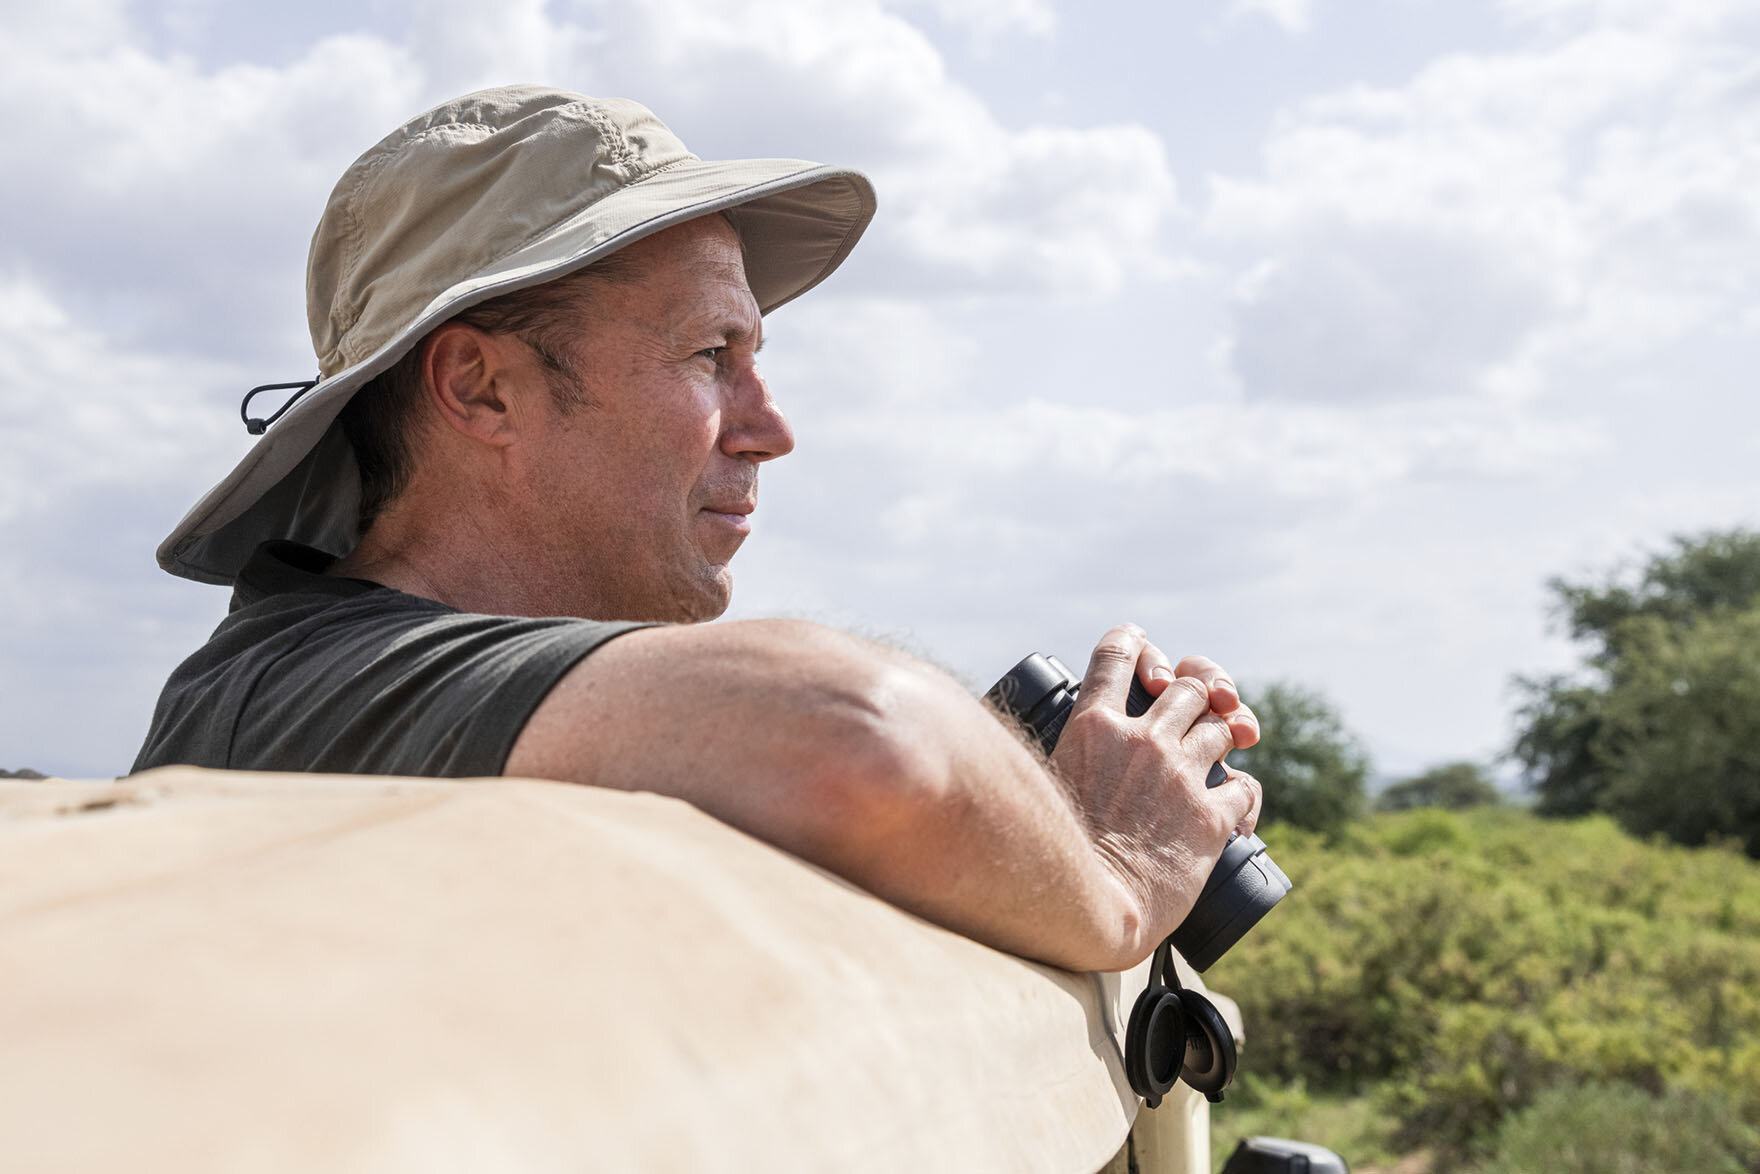 Curt Vander Meer peeking out the top of a jeep with binoculars surveying the Masai Mara game reserve in Narok County, Kenya